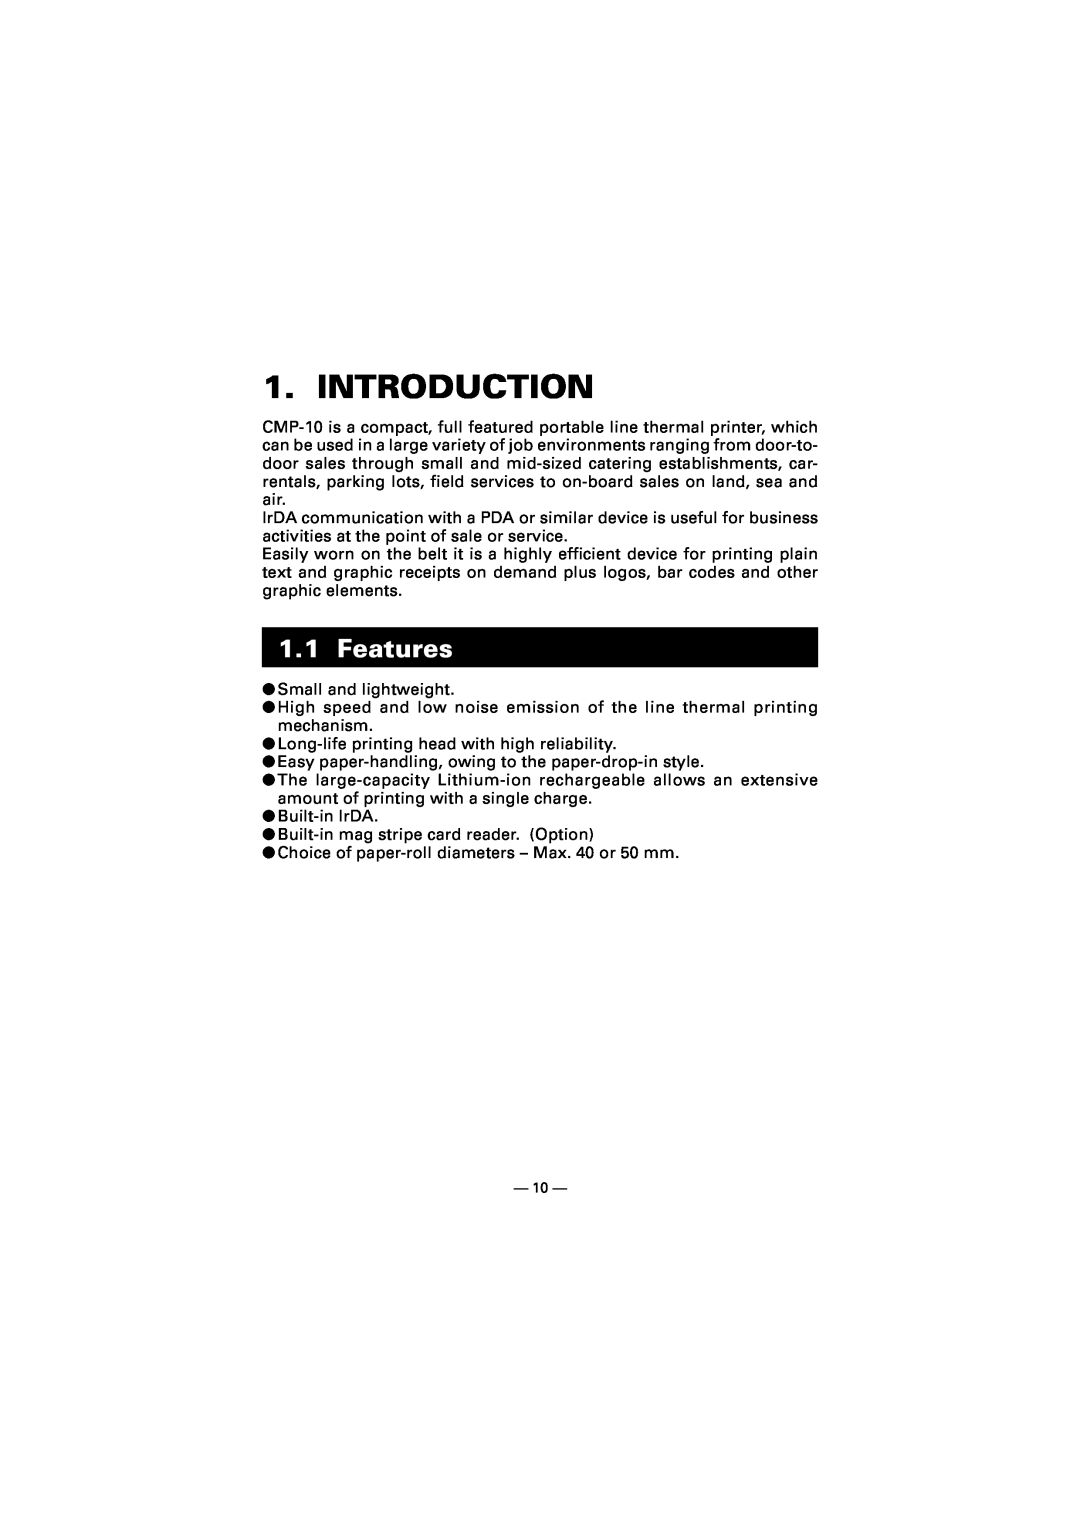 Citizen Systems CMP-10 manual Introduction, Features 